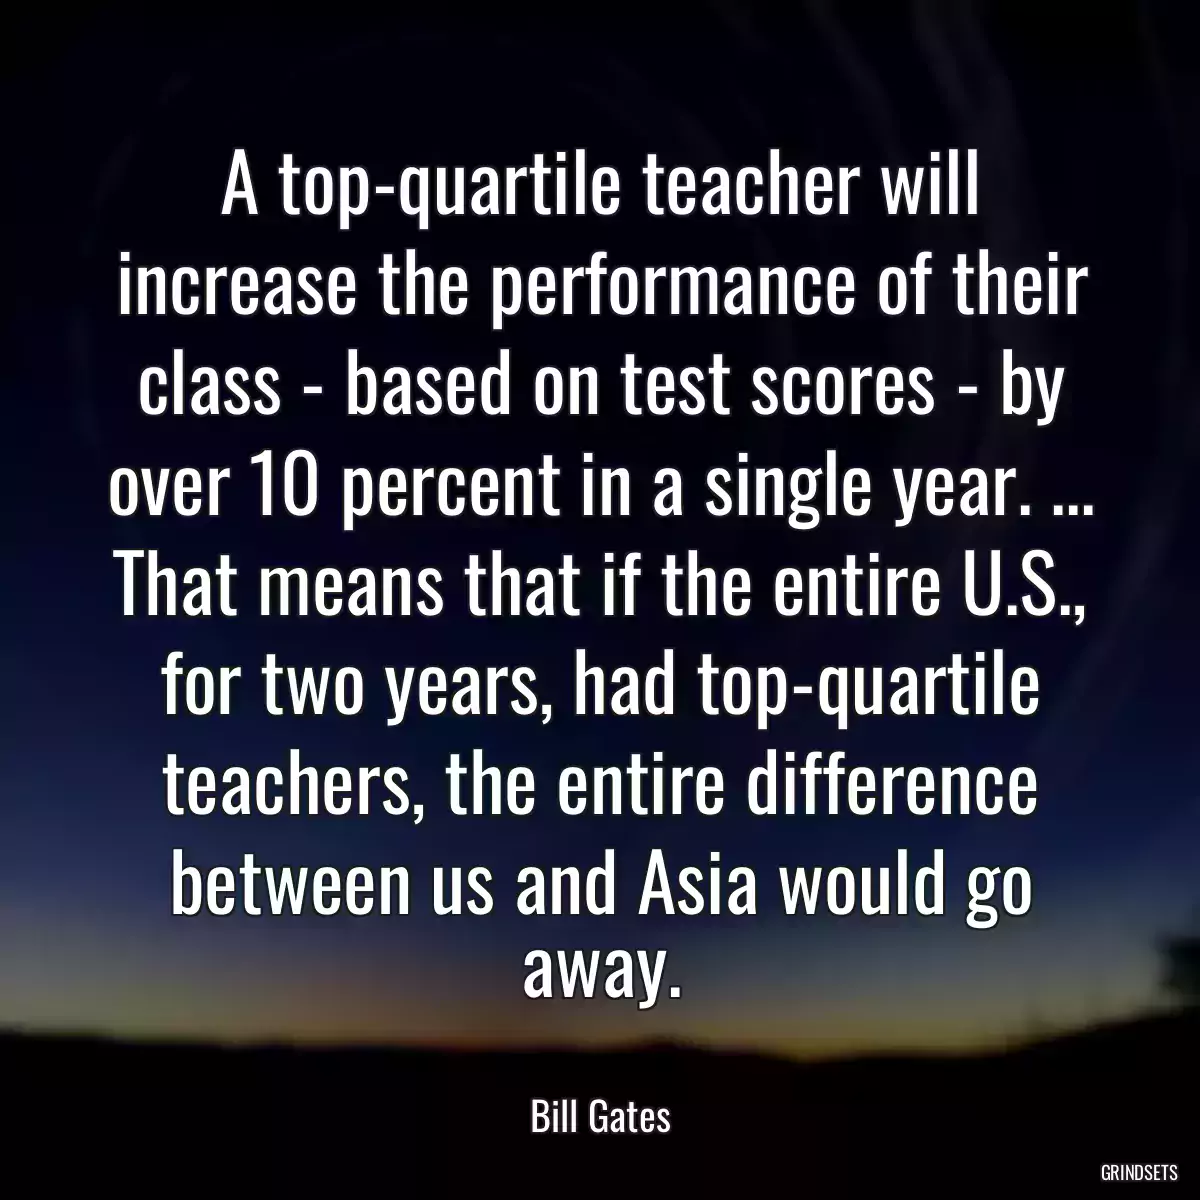 A top-quartile teacher will increase the performance of their class - based on test scores - by over 10 percent in a single year. ... That means that if the entire U.S., for two years, had top-quartile teachers, the entire difference between us and Asia would go away.